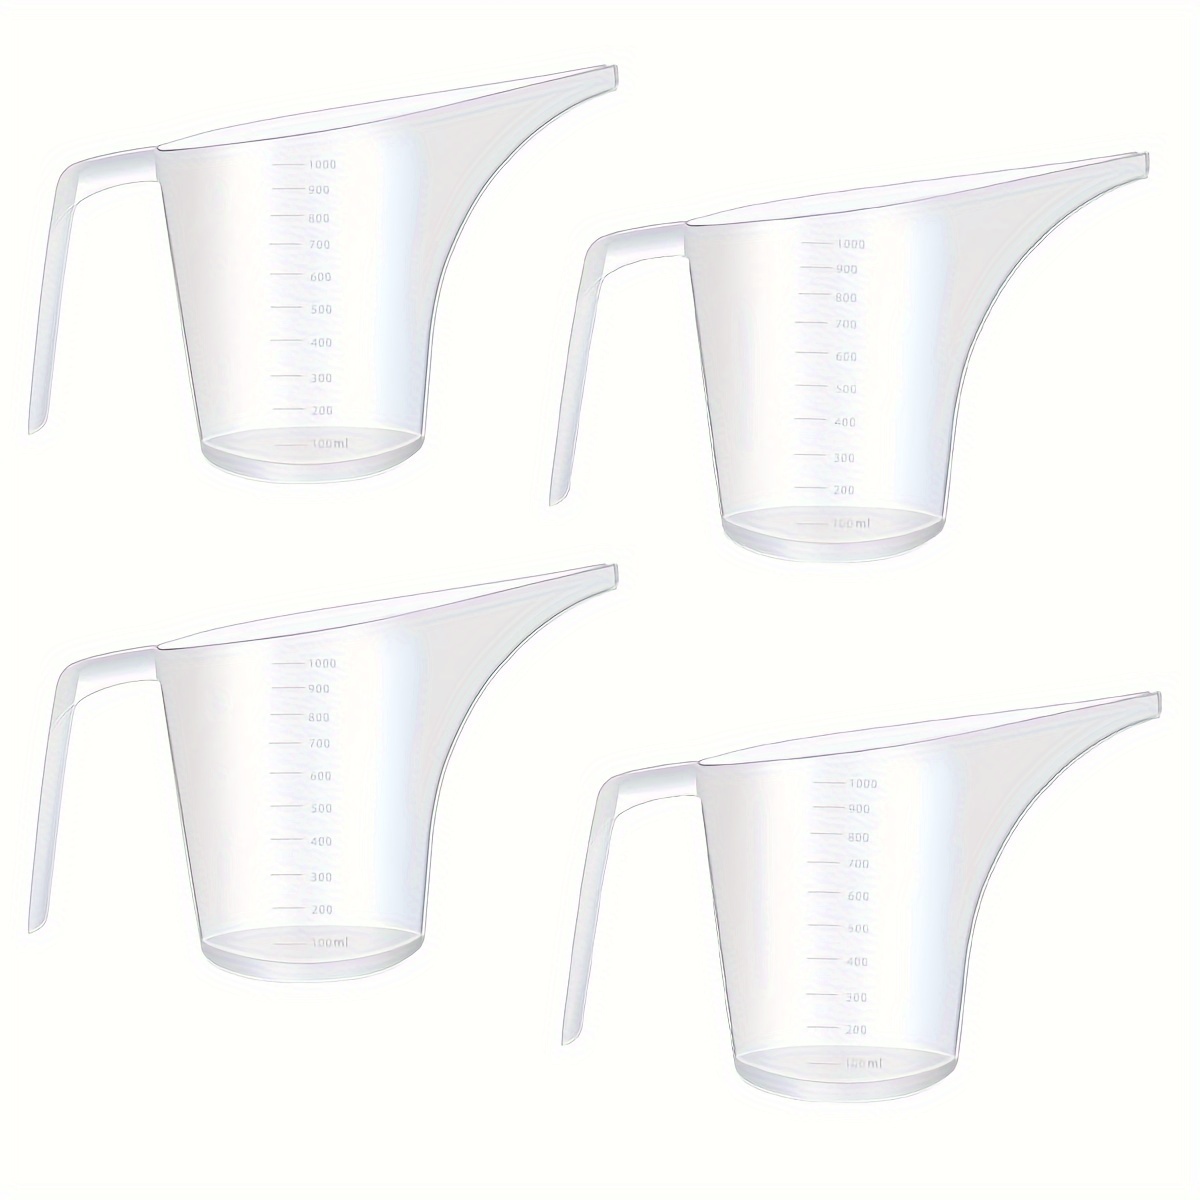 

4pcs, Funnel Pitcher, Long Spout Measuring Cup, Plastic Measuring Cup With Scale, Plastic Measuring Cup For Soap Making Batter Pour Muffin Pastry Cake Making, Plastic Measuring Jug Cup, Baking Tools